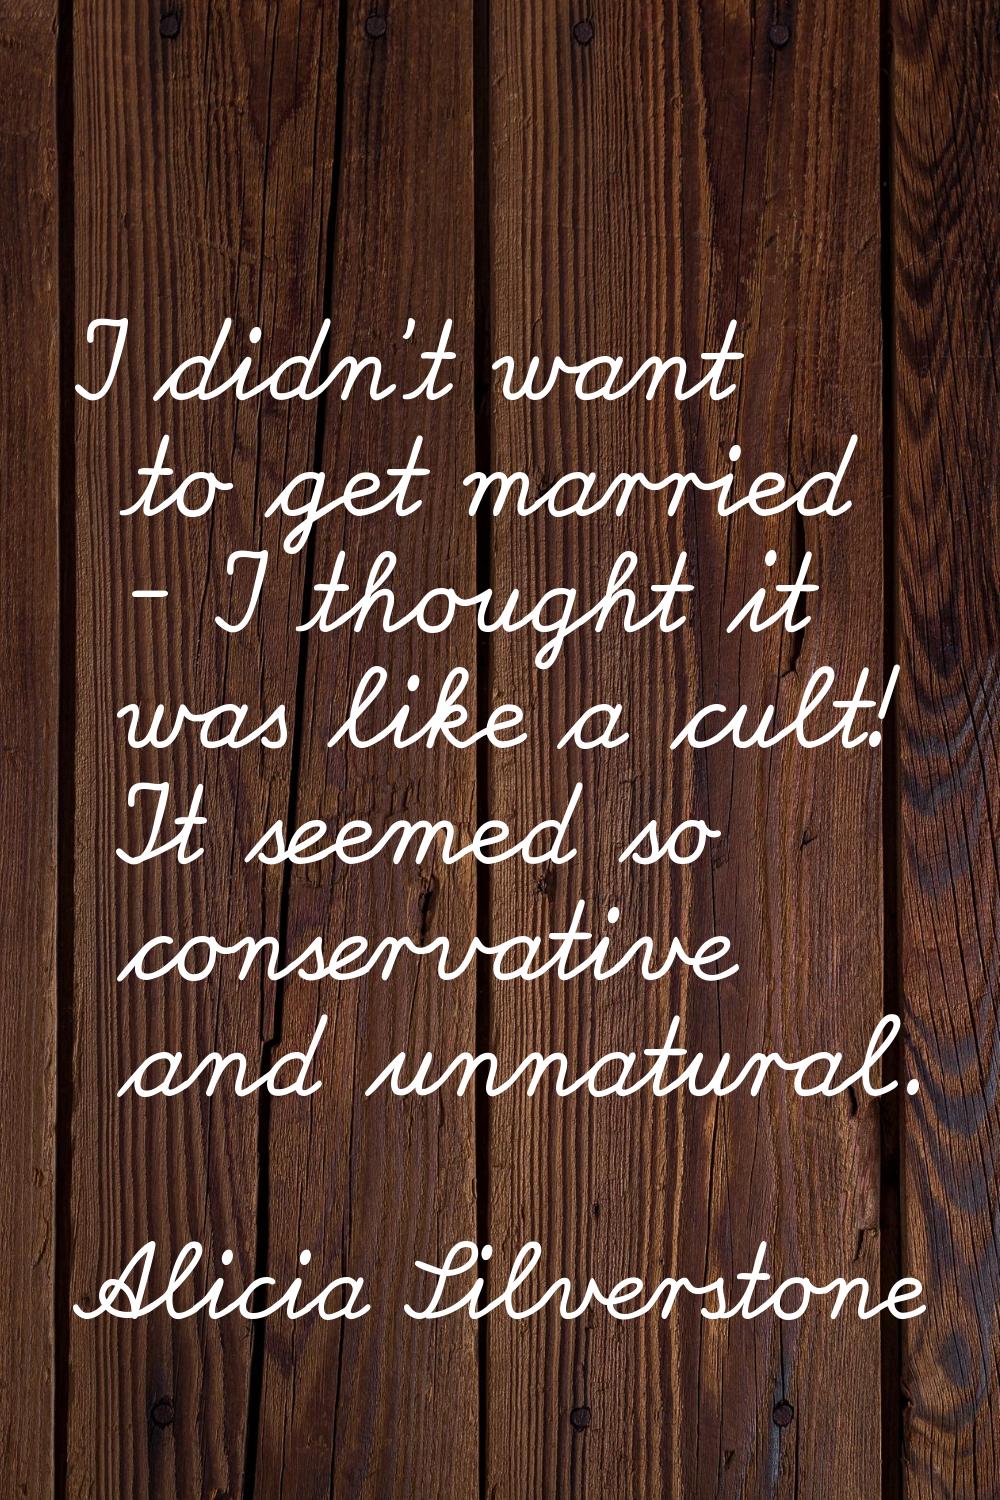 I didn't want to get married - I thought it was like a cult! It seemed so conservative and unnatura